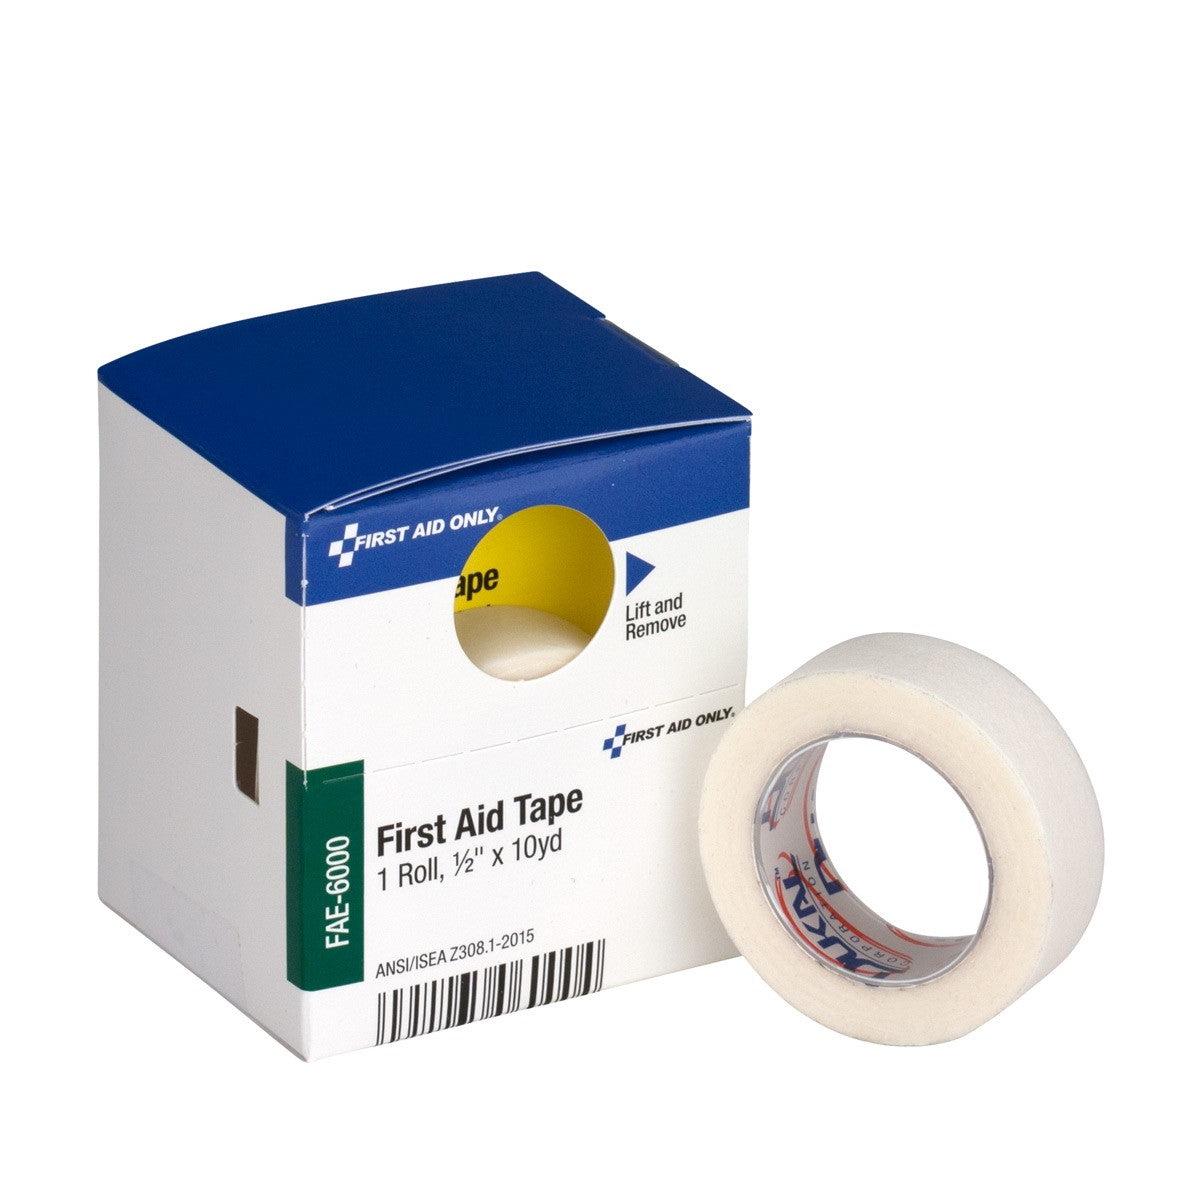 Adhesive Tape Remover Pads (100/bx) : E-FirstaidSupplies